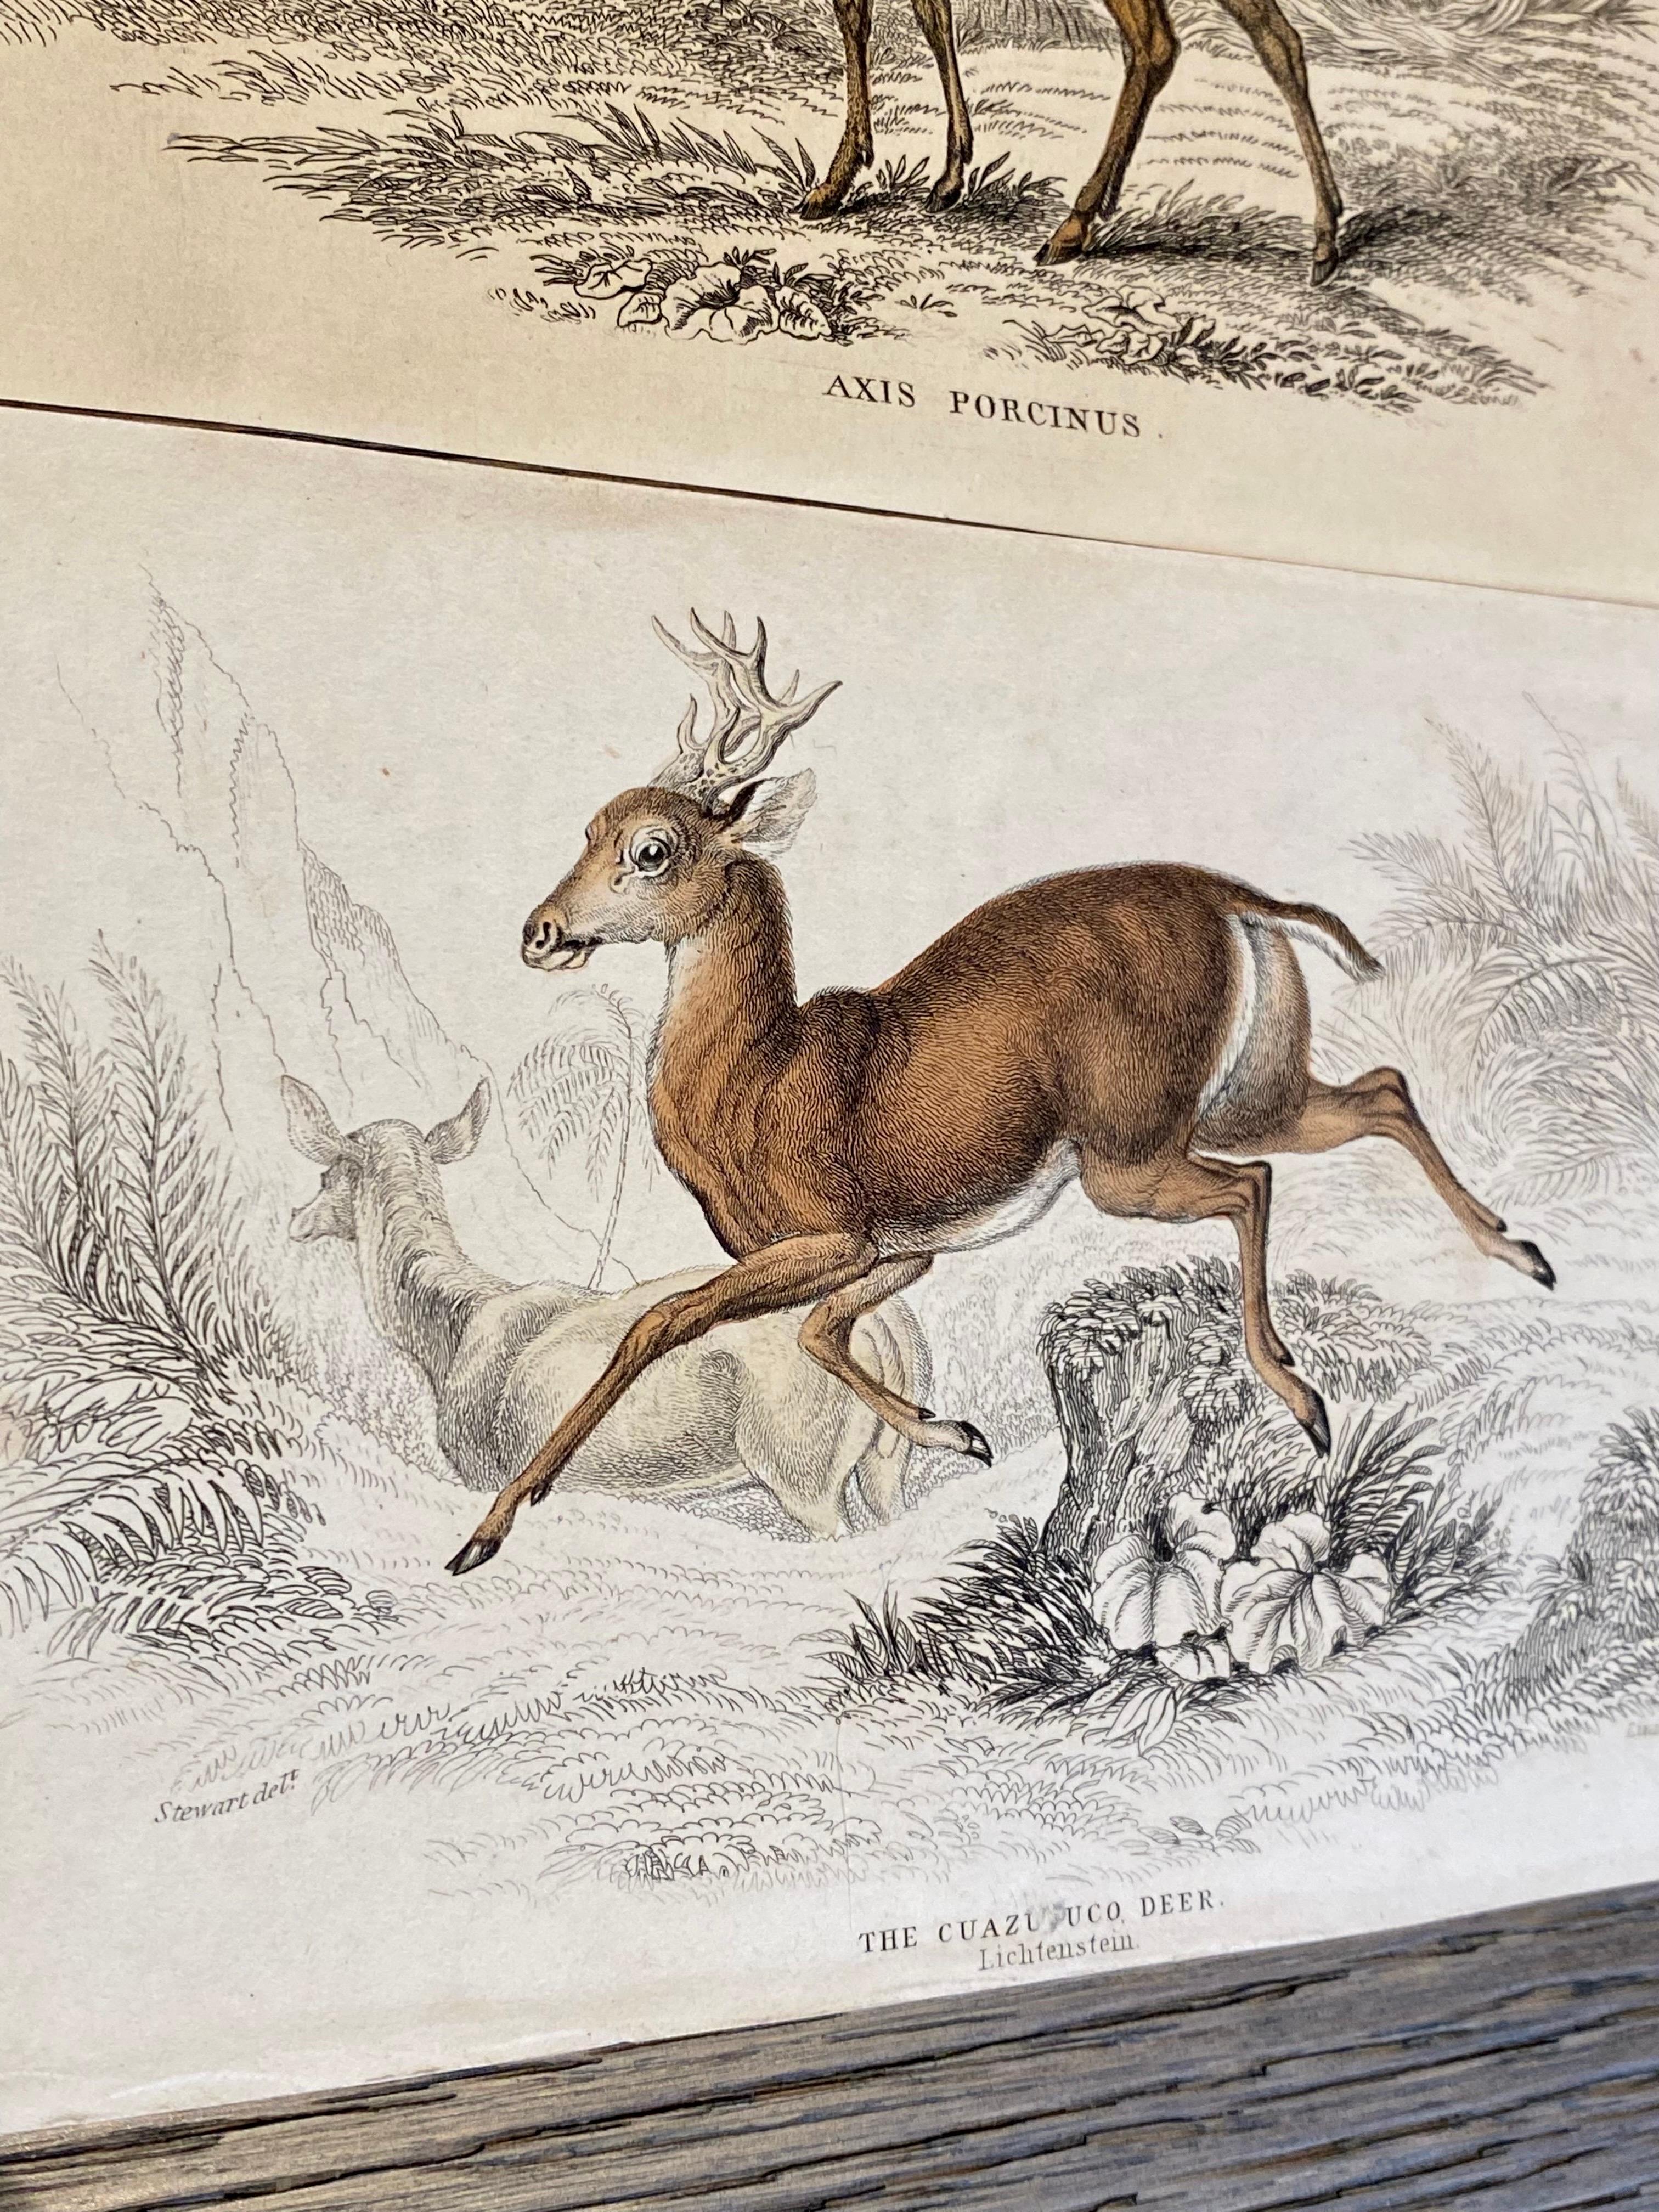 Set of 9 hand colored prints of rare types of deers and antilopes which lived in South-America, Africa and South-east Asia. Published in 1834 based on the work of Scottish naturalist, Sir William Jardine, 7th Baronet. 

Depicting amongst others a: